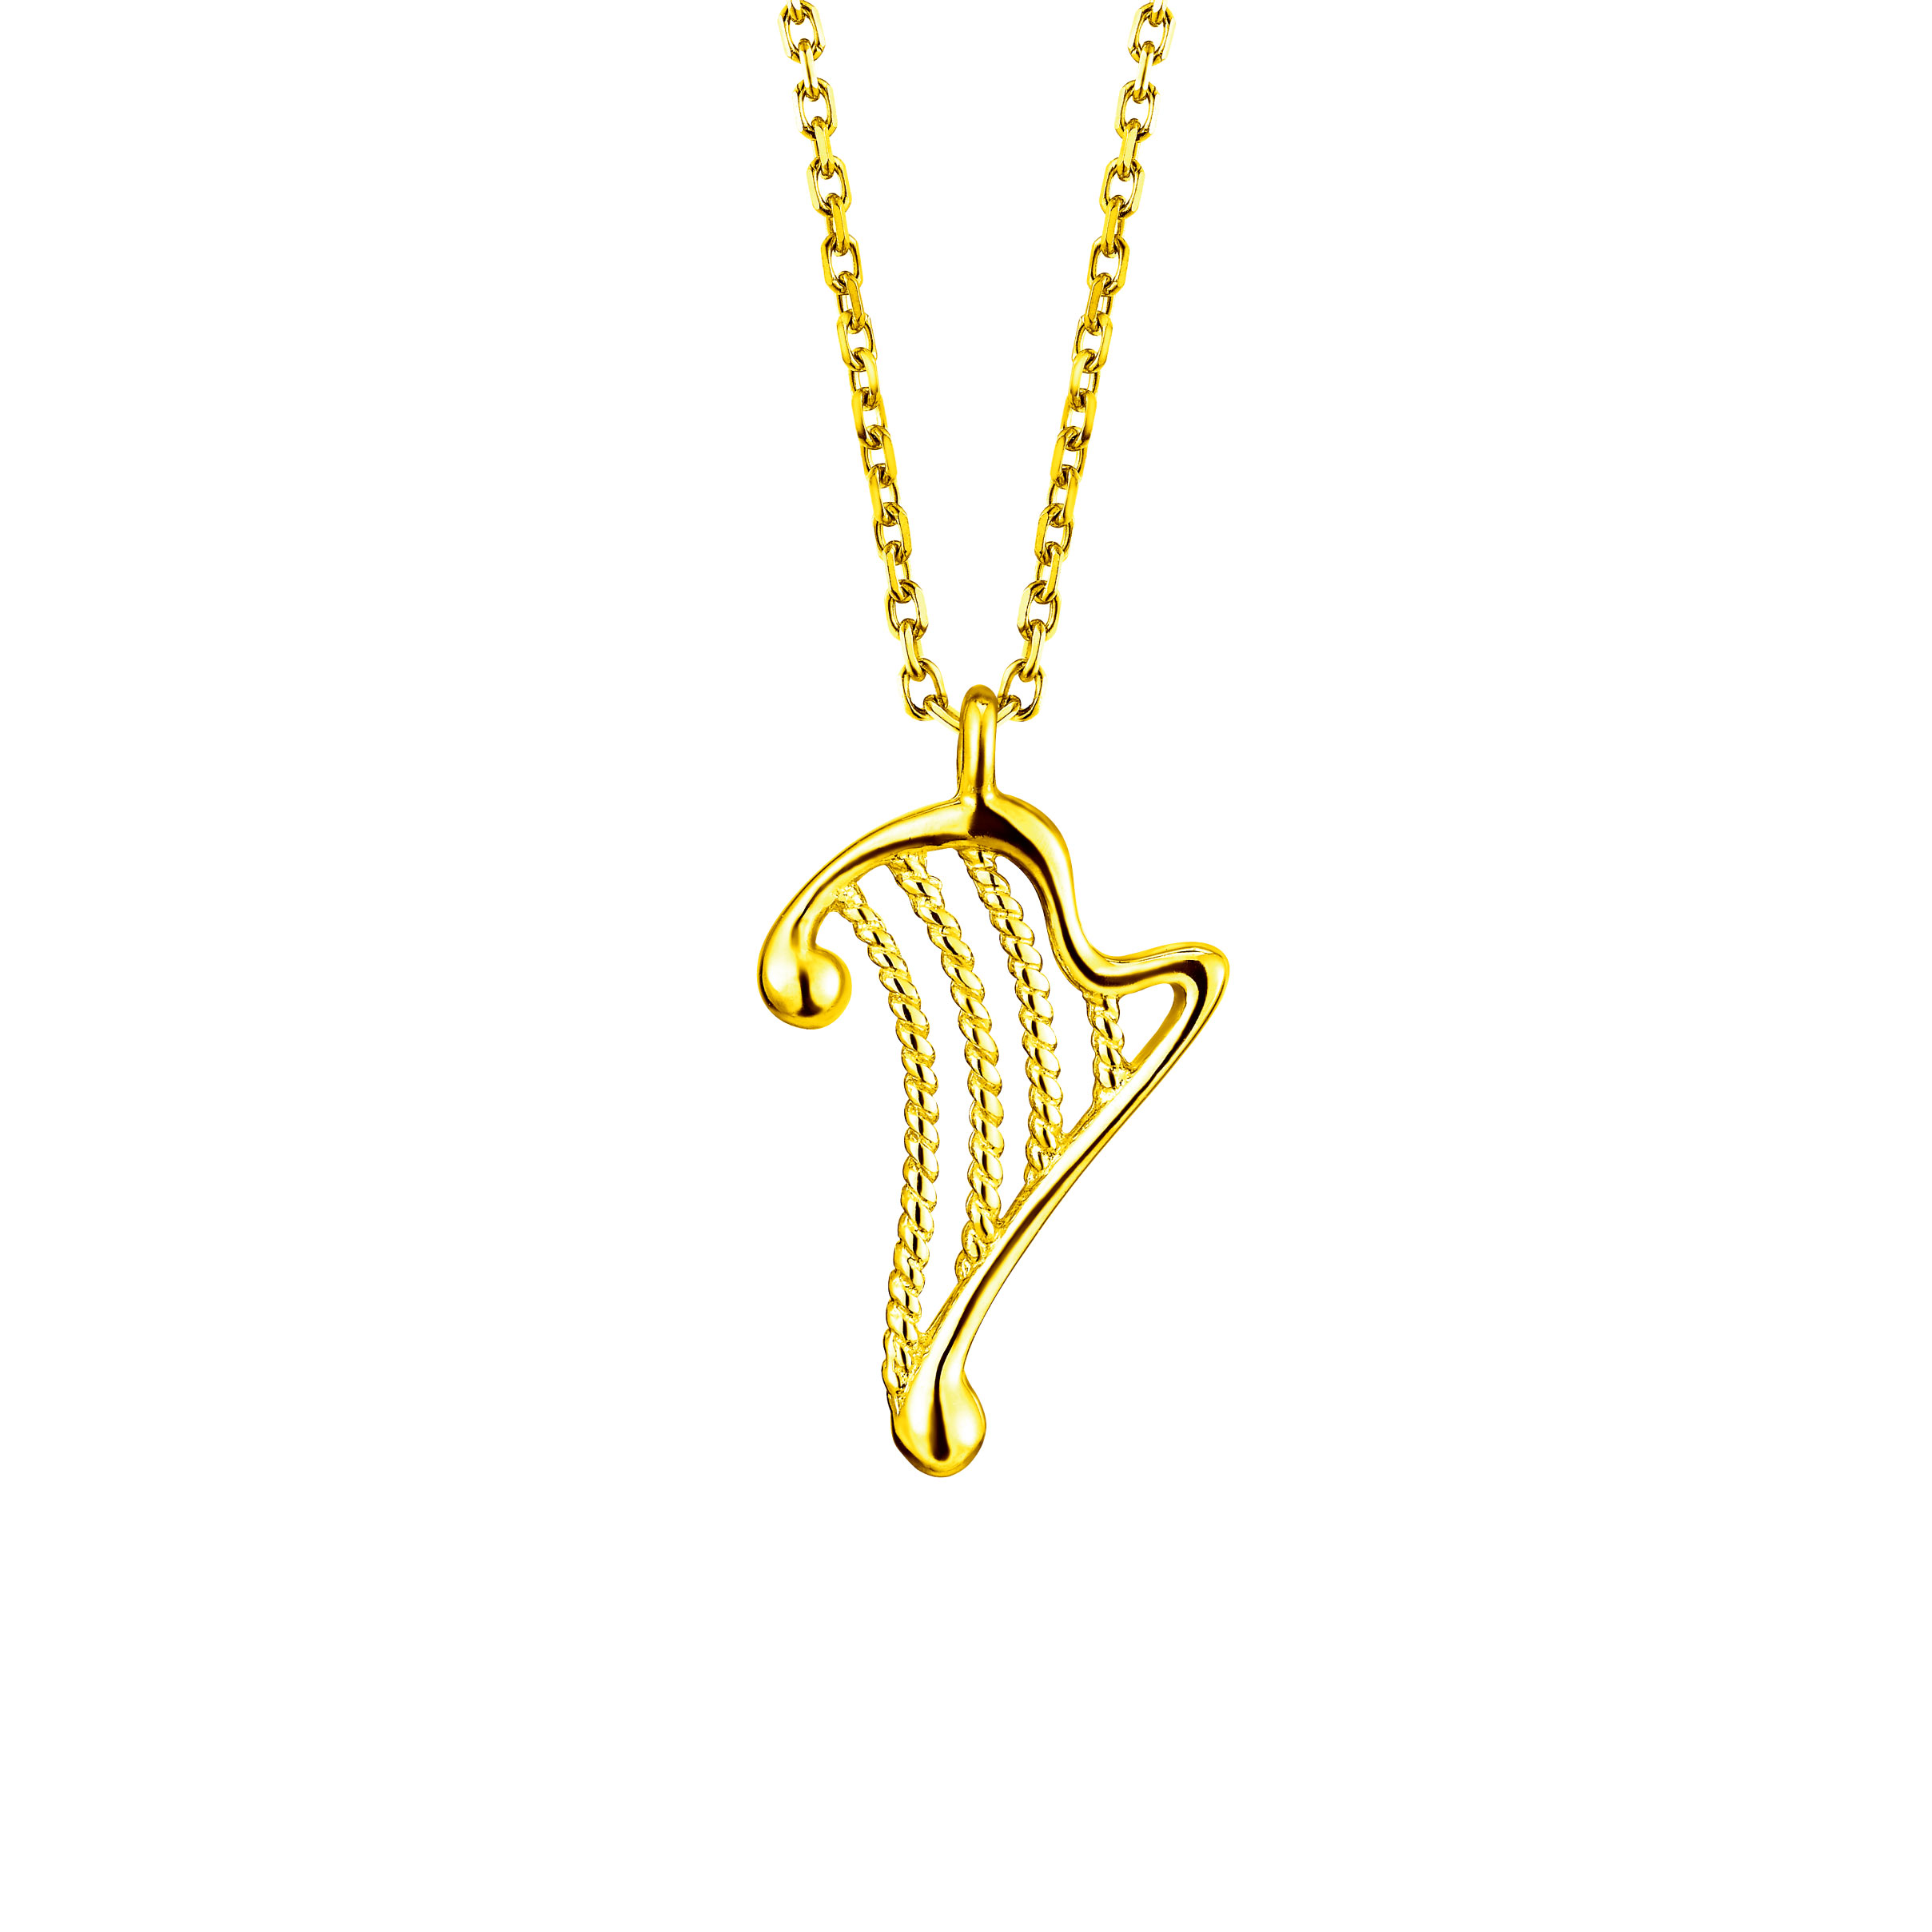 Goldstyle "Enchanted Lyre" Gold Necklace 